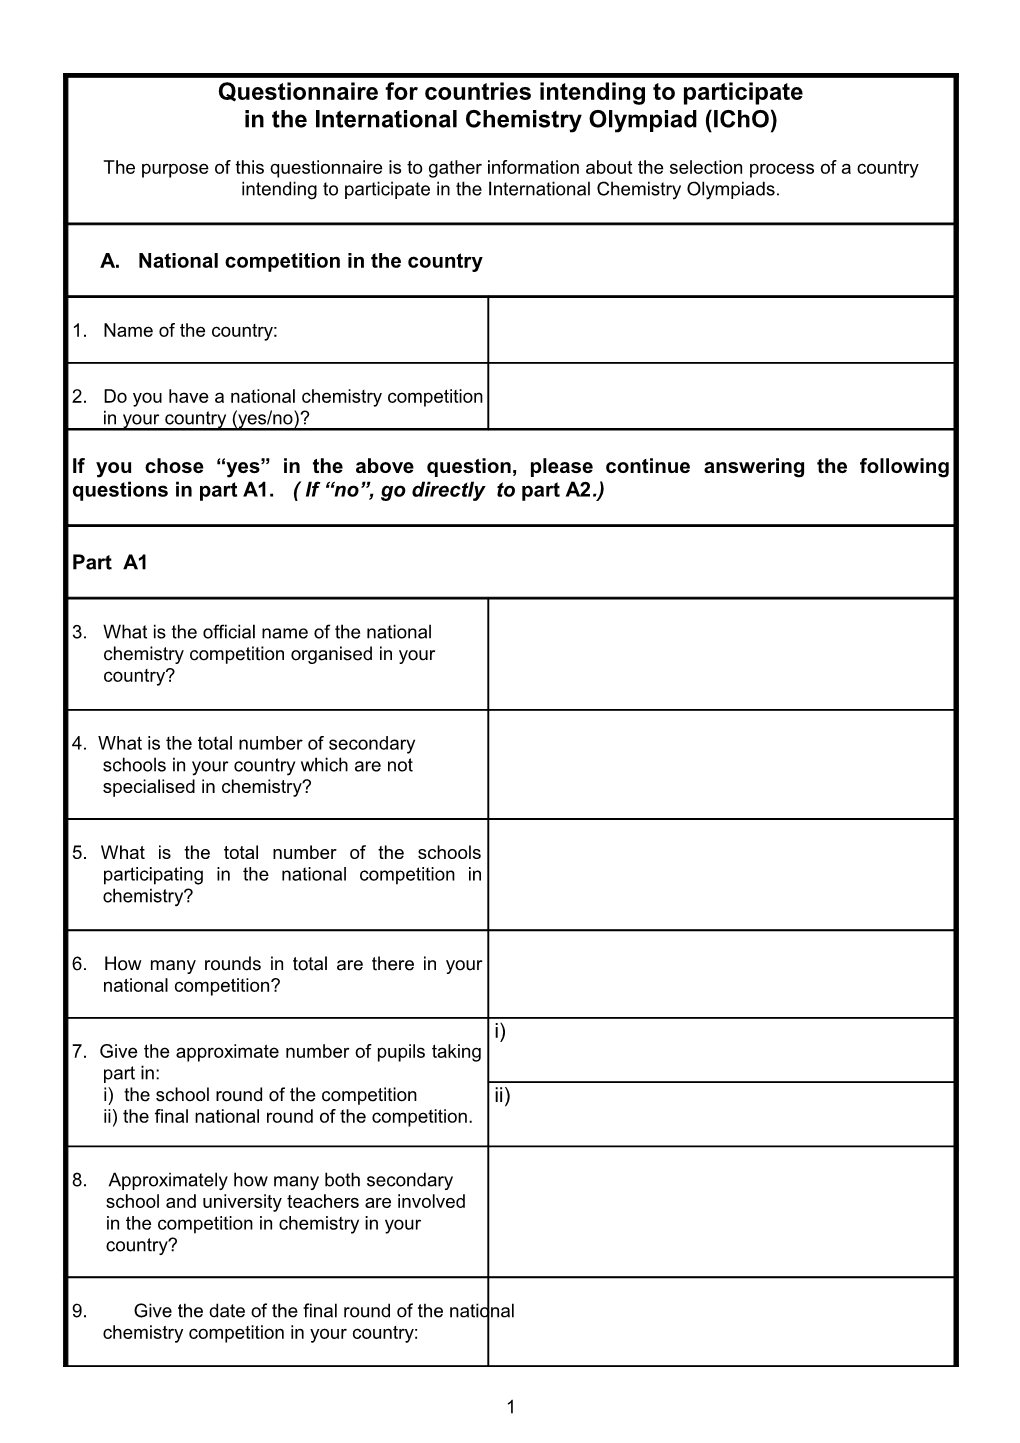 Questionnaire for Countries Intending to Participate